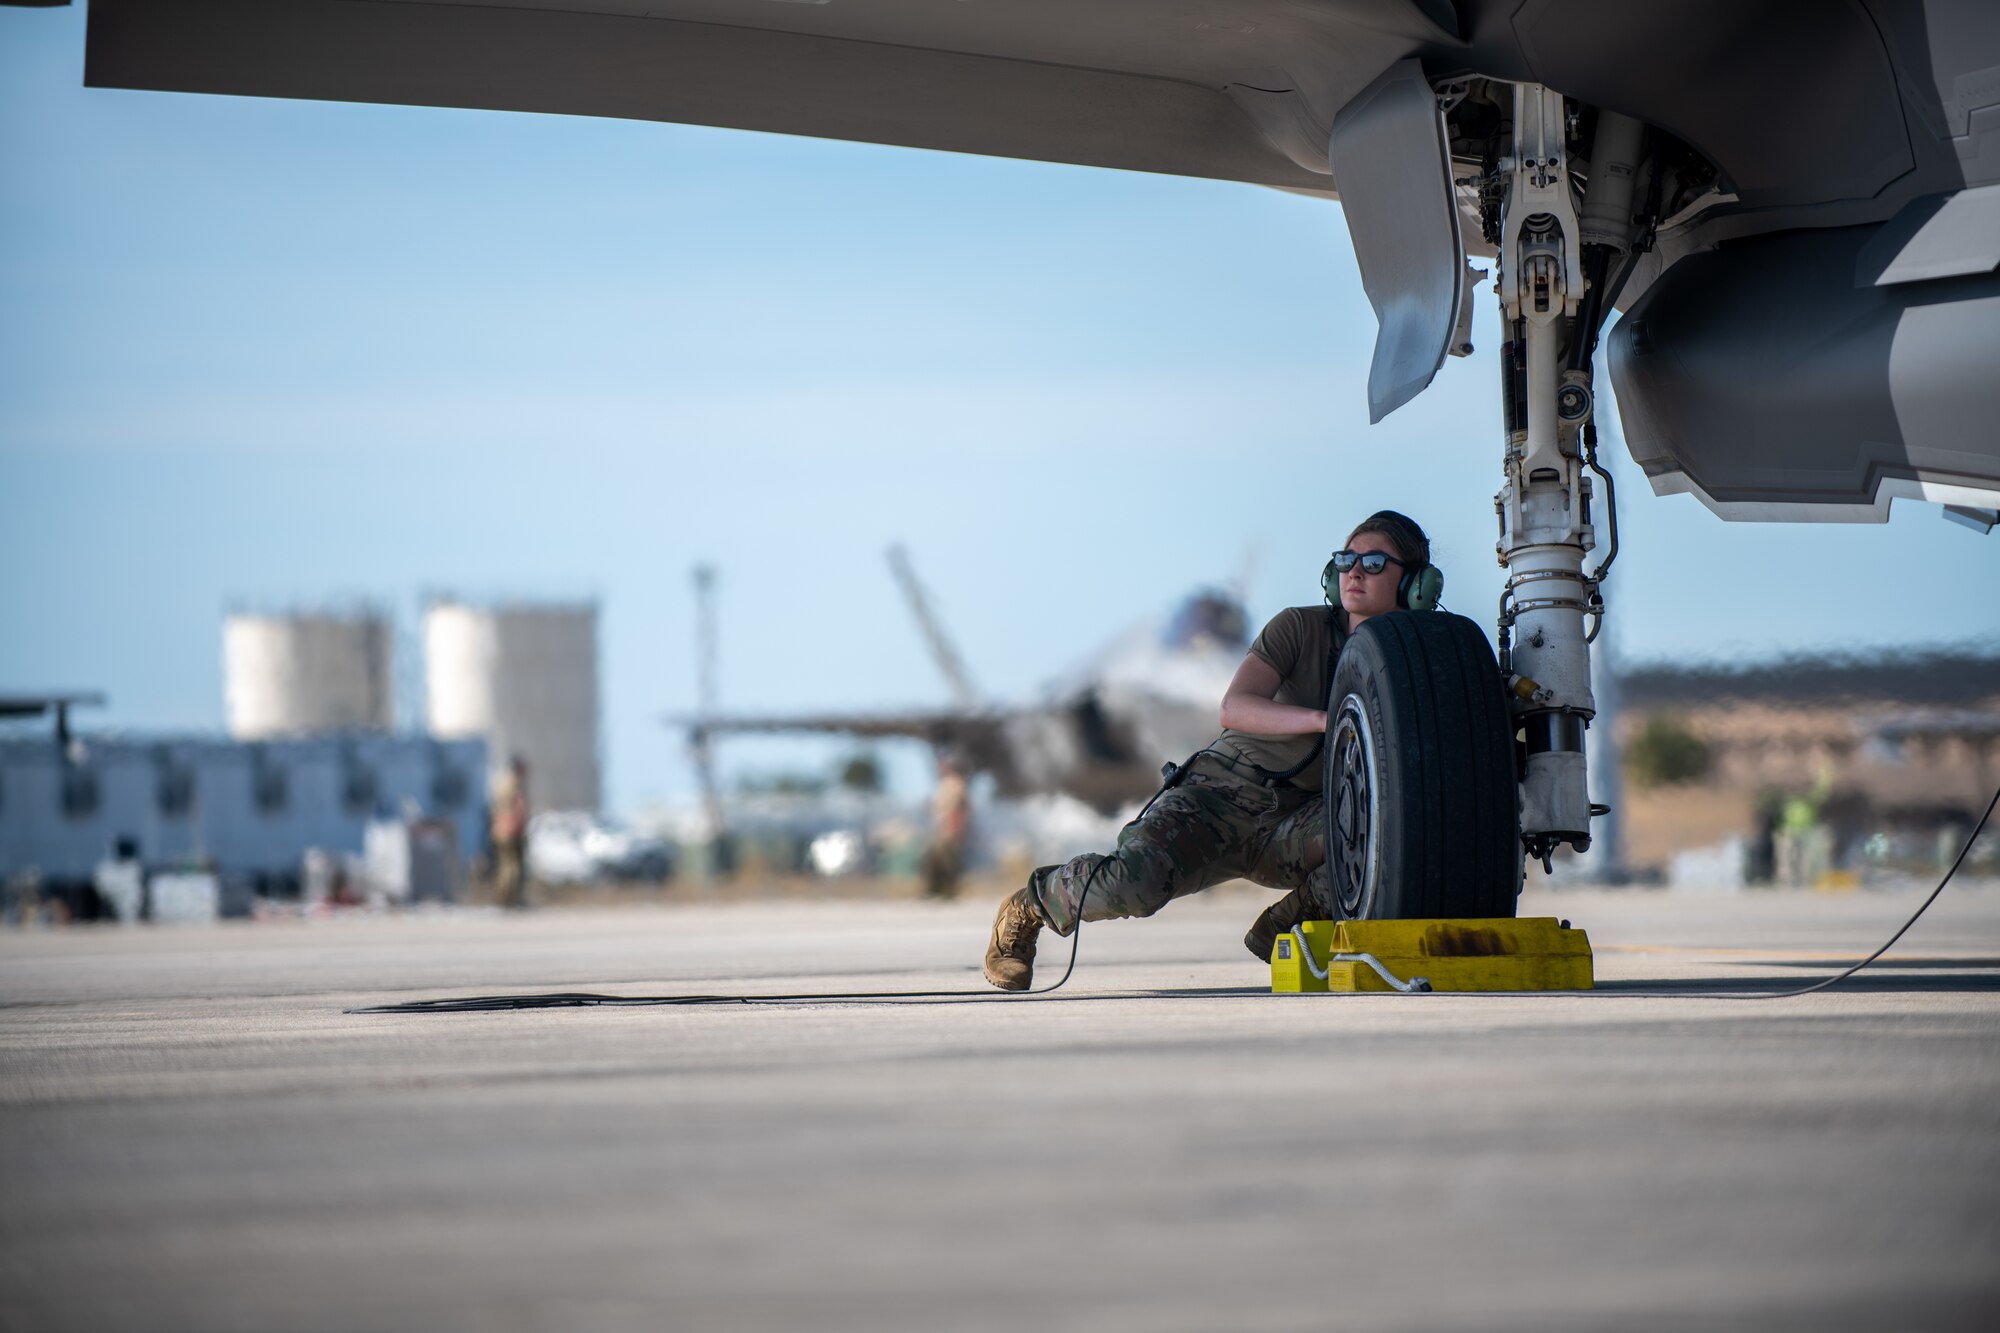 Senior Airman Isabel Murphy, a crew chief assigned to the 158th Maintenance Group, Vermont Air National Guard, prepares to launch an F-35A Lightning II during a training exercise.